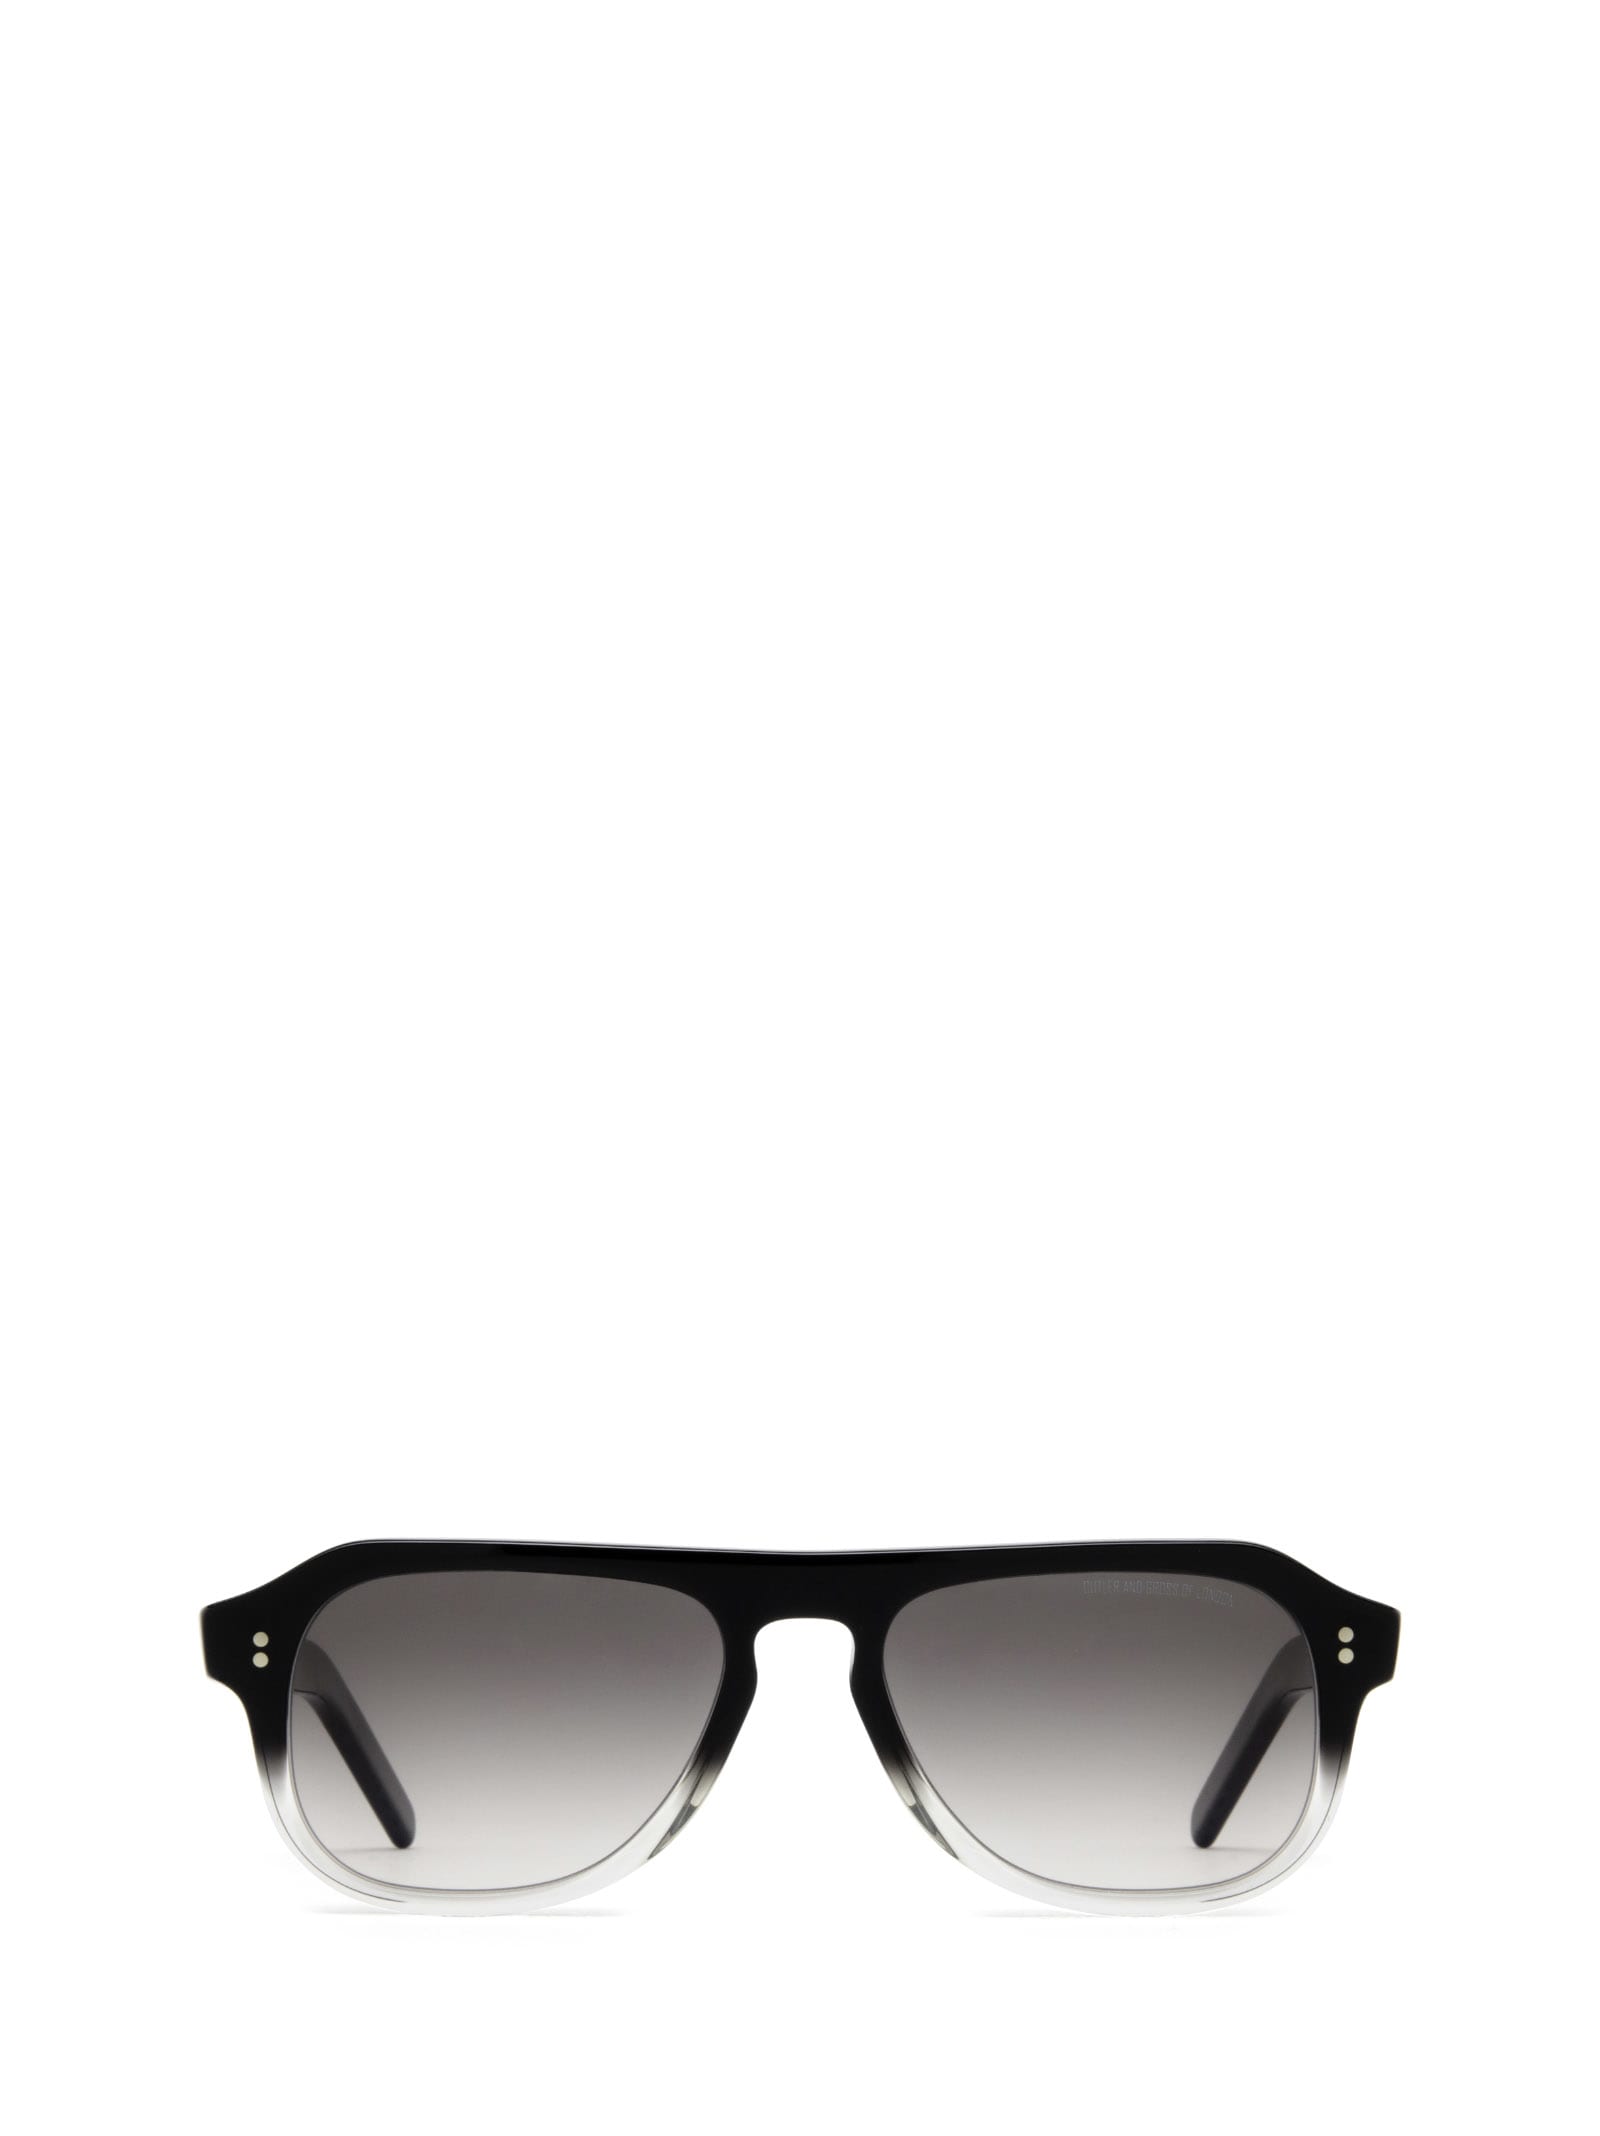 CUTLER AND GROSS 0822V2 SUN BLACK TO CLEAR FADE SUNGLASSES